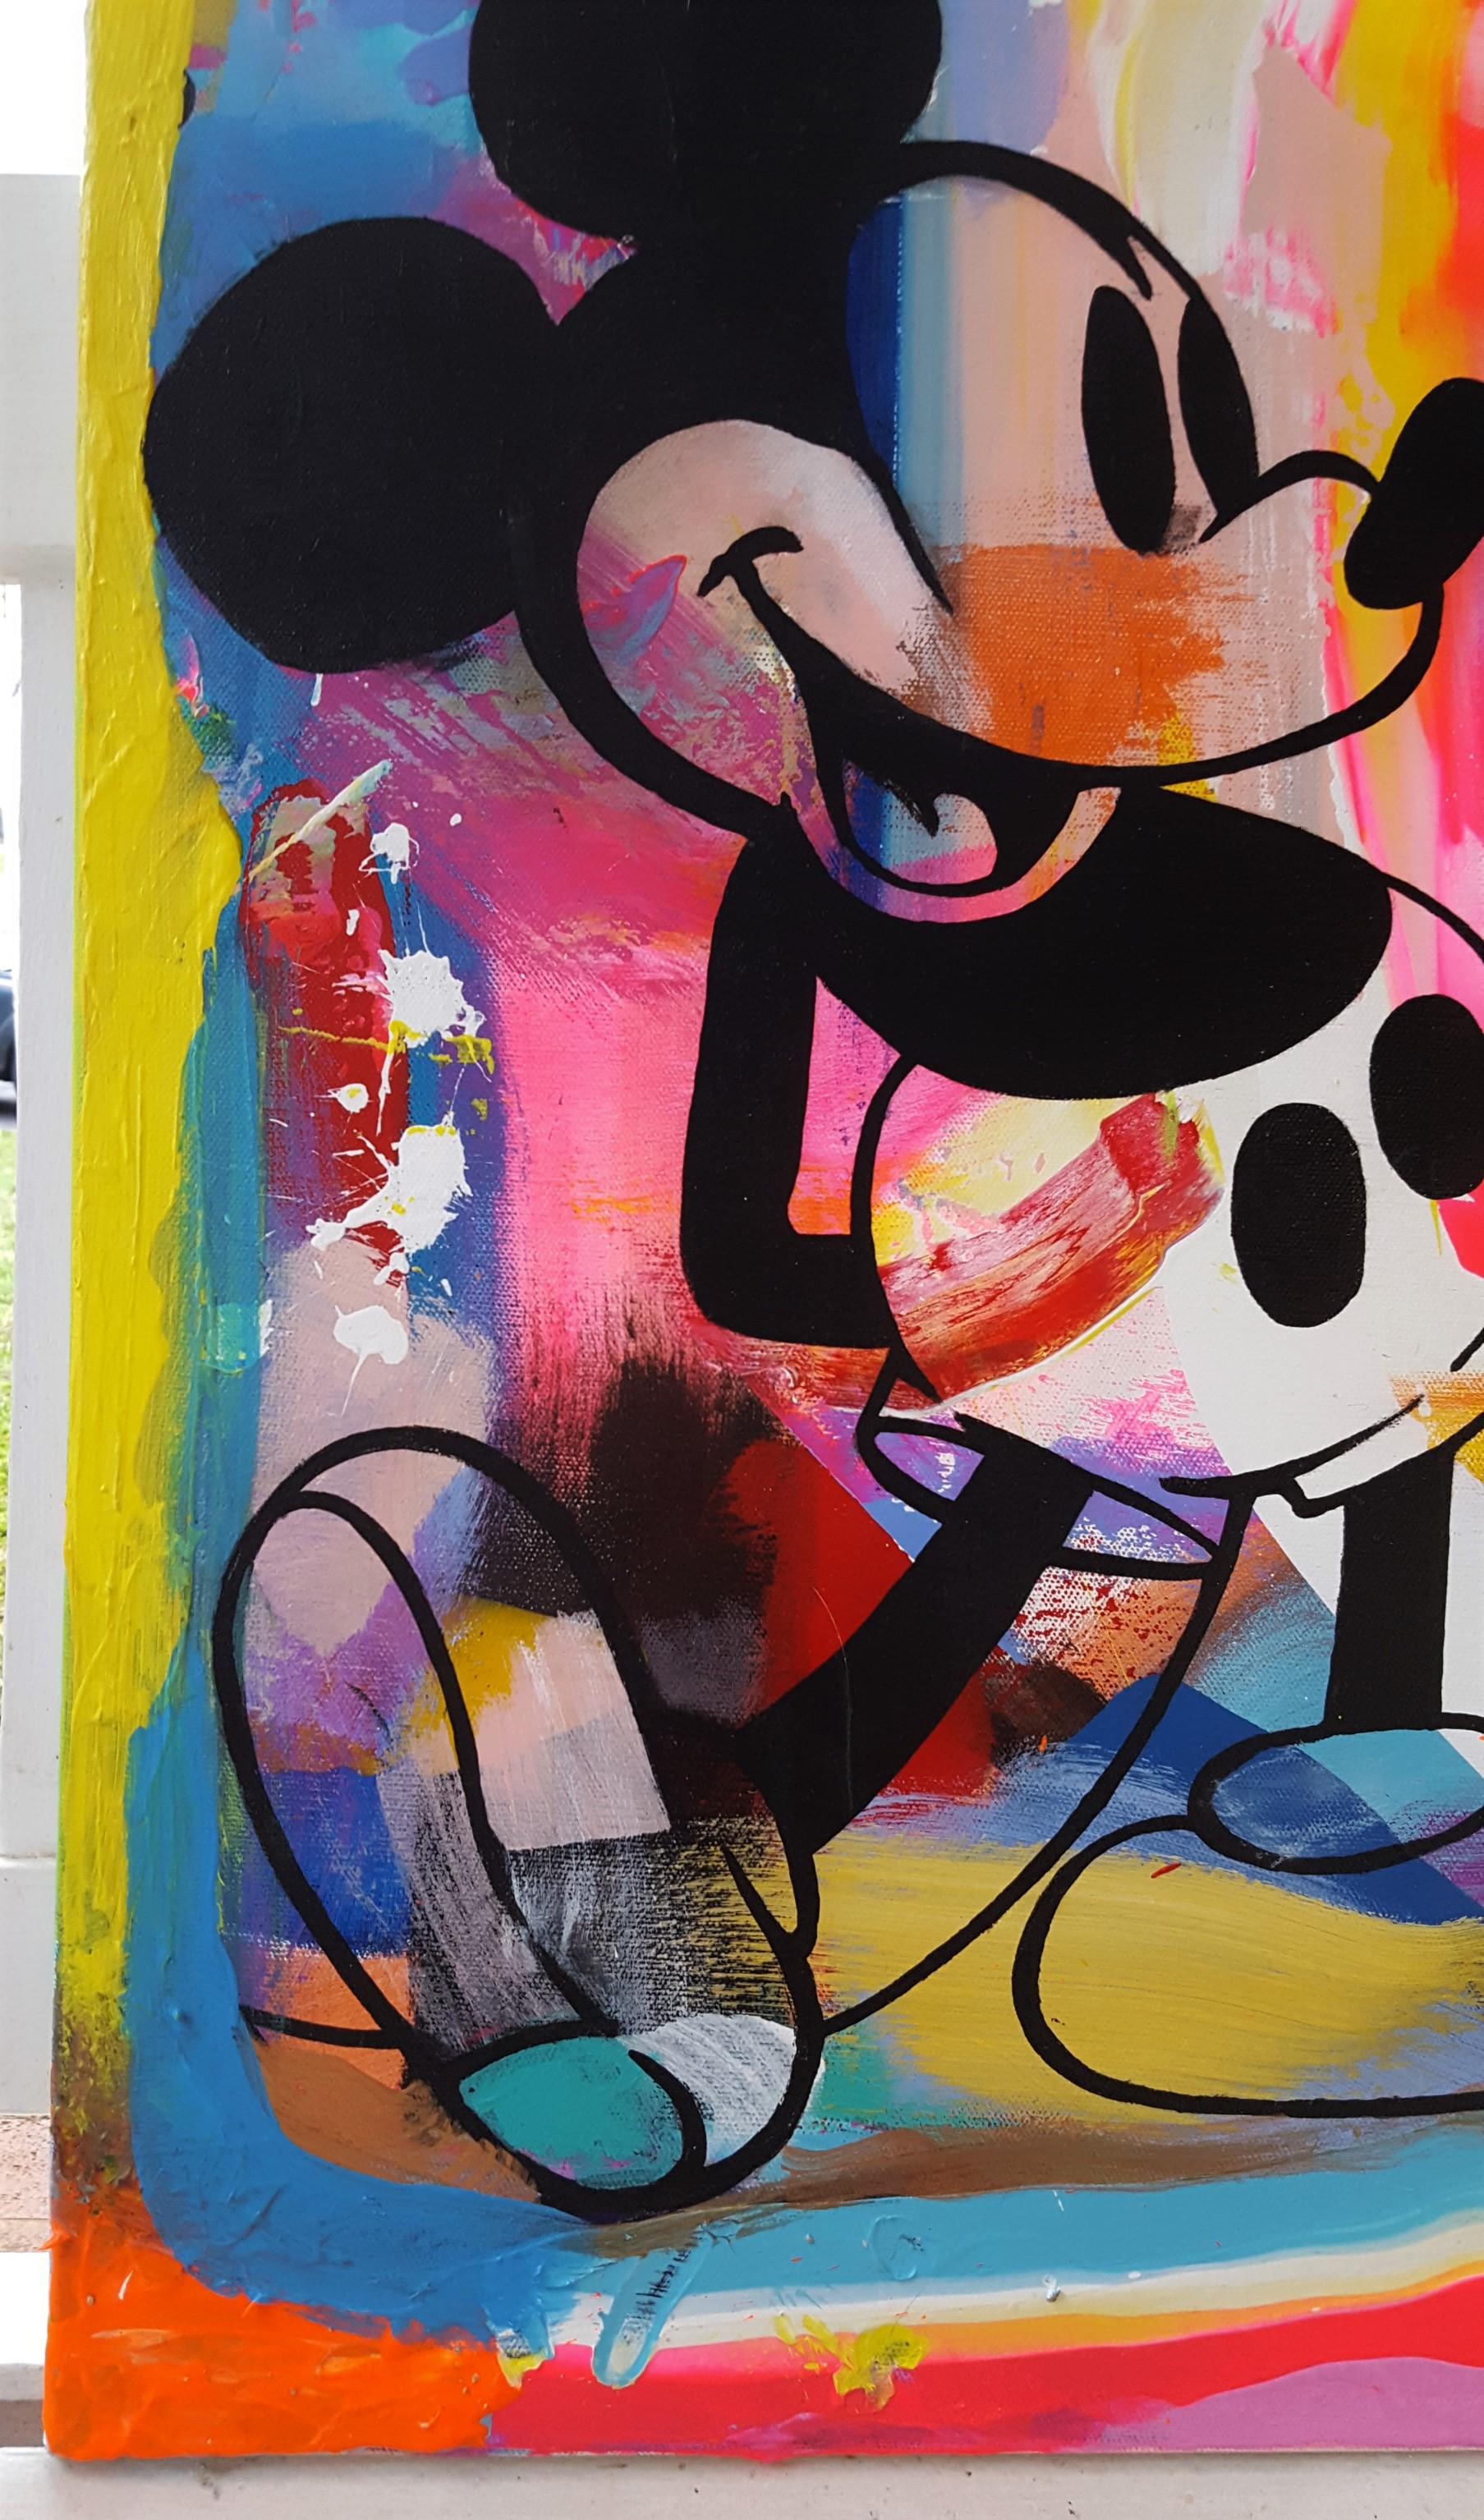 Mickey Mouse, Snoopy, and Woodstock Group Icon - Painting by Jack Graves III